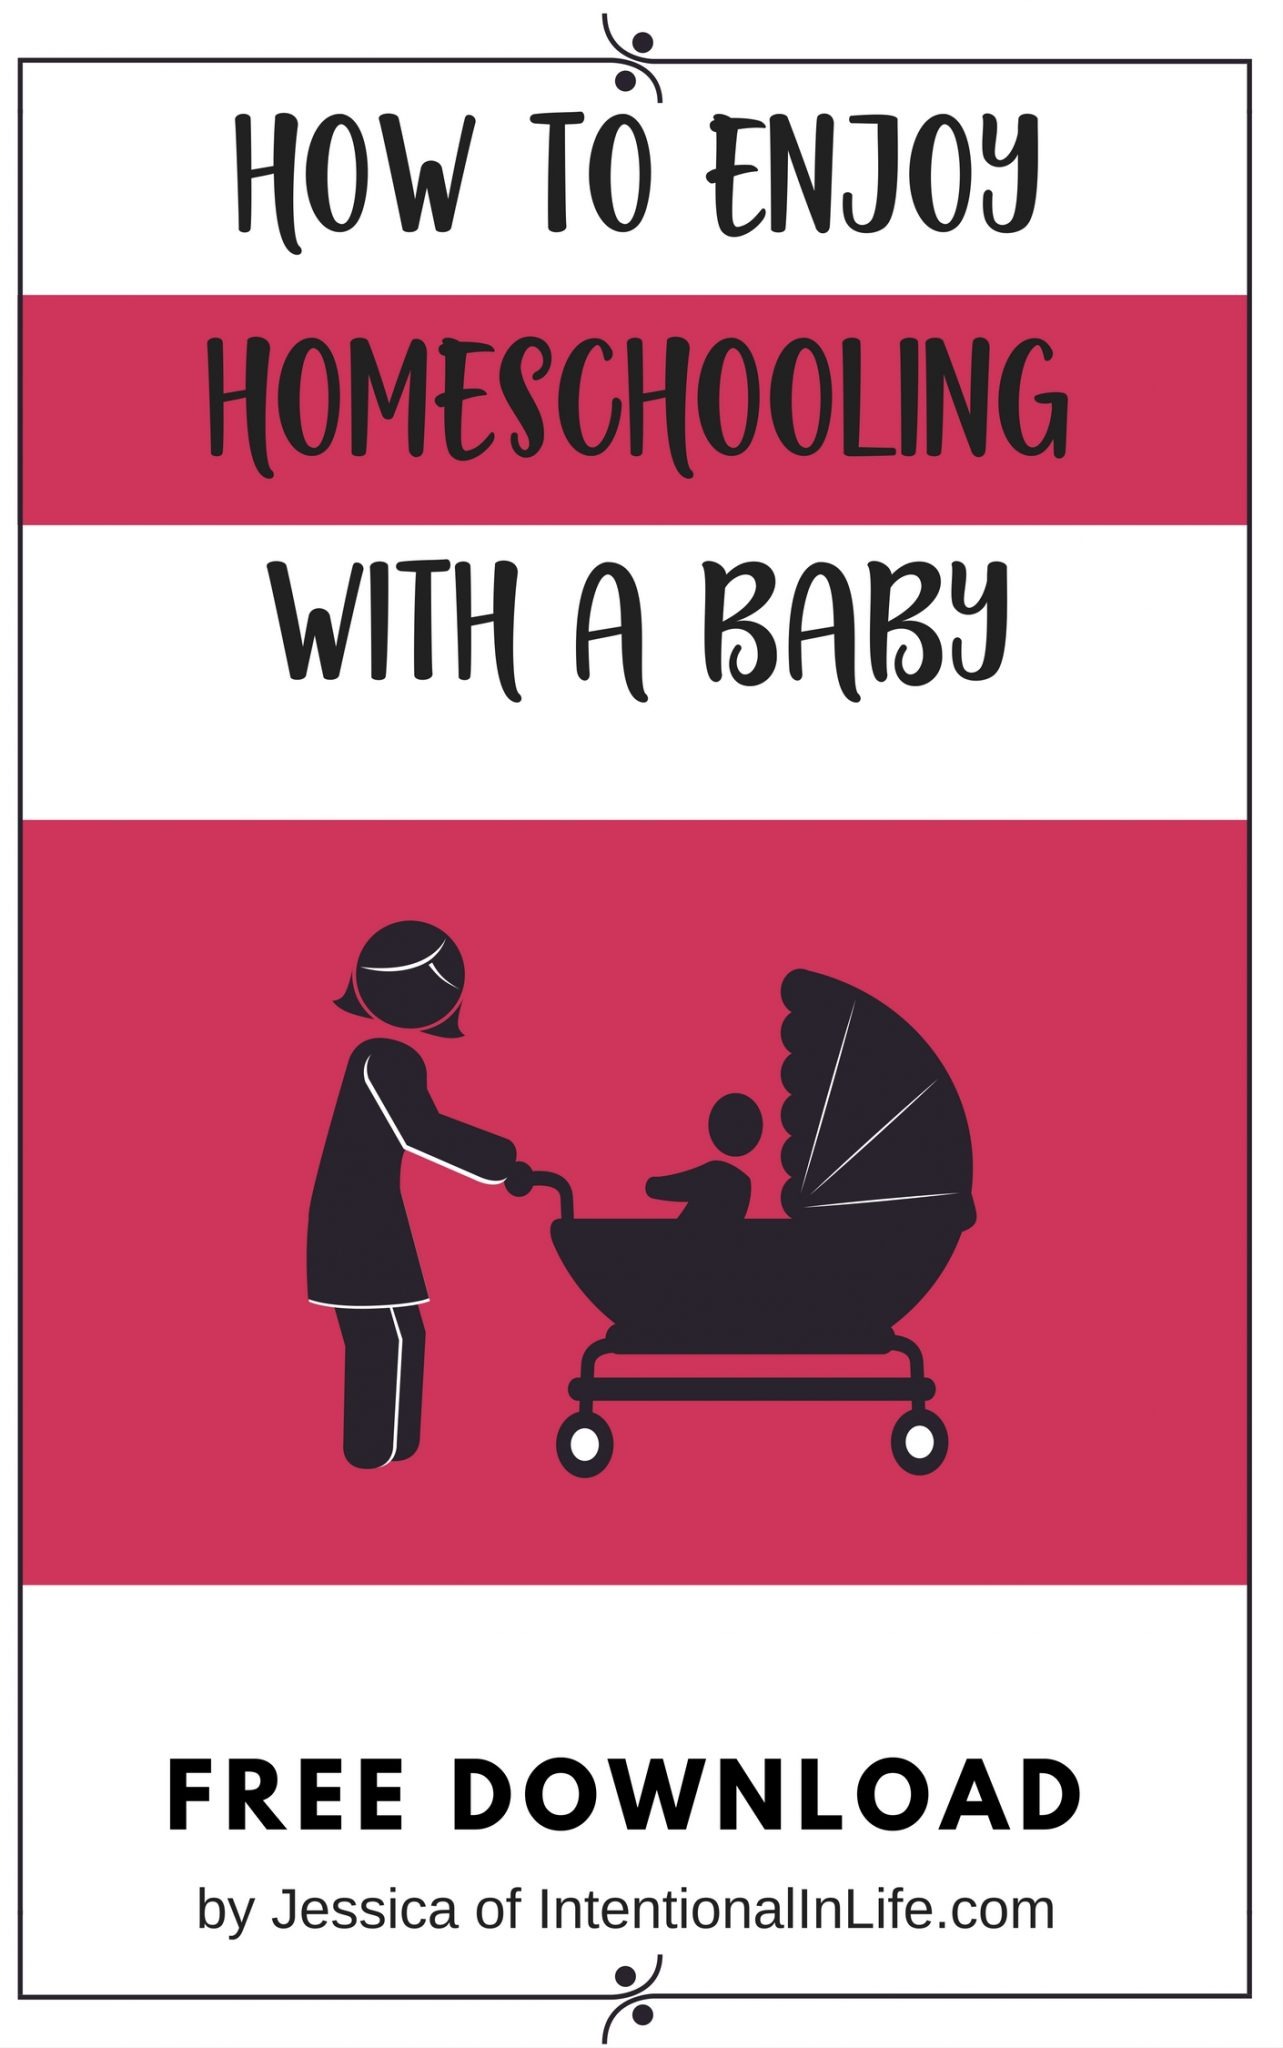 Free download packed with Practical tips on how to enjoy homeschooling with your baby